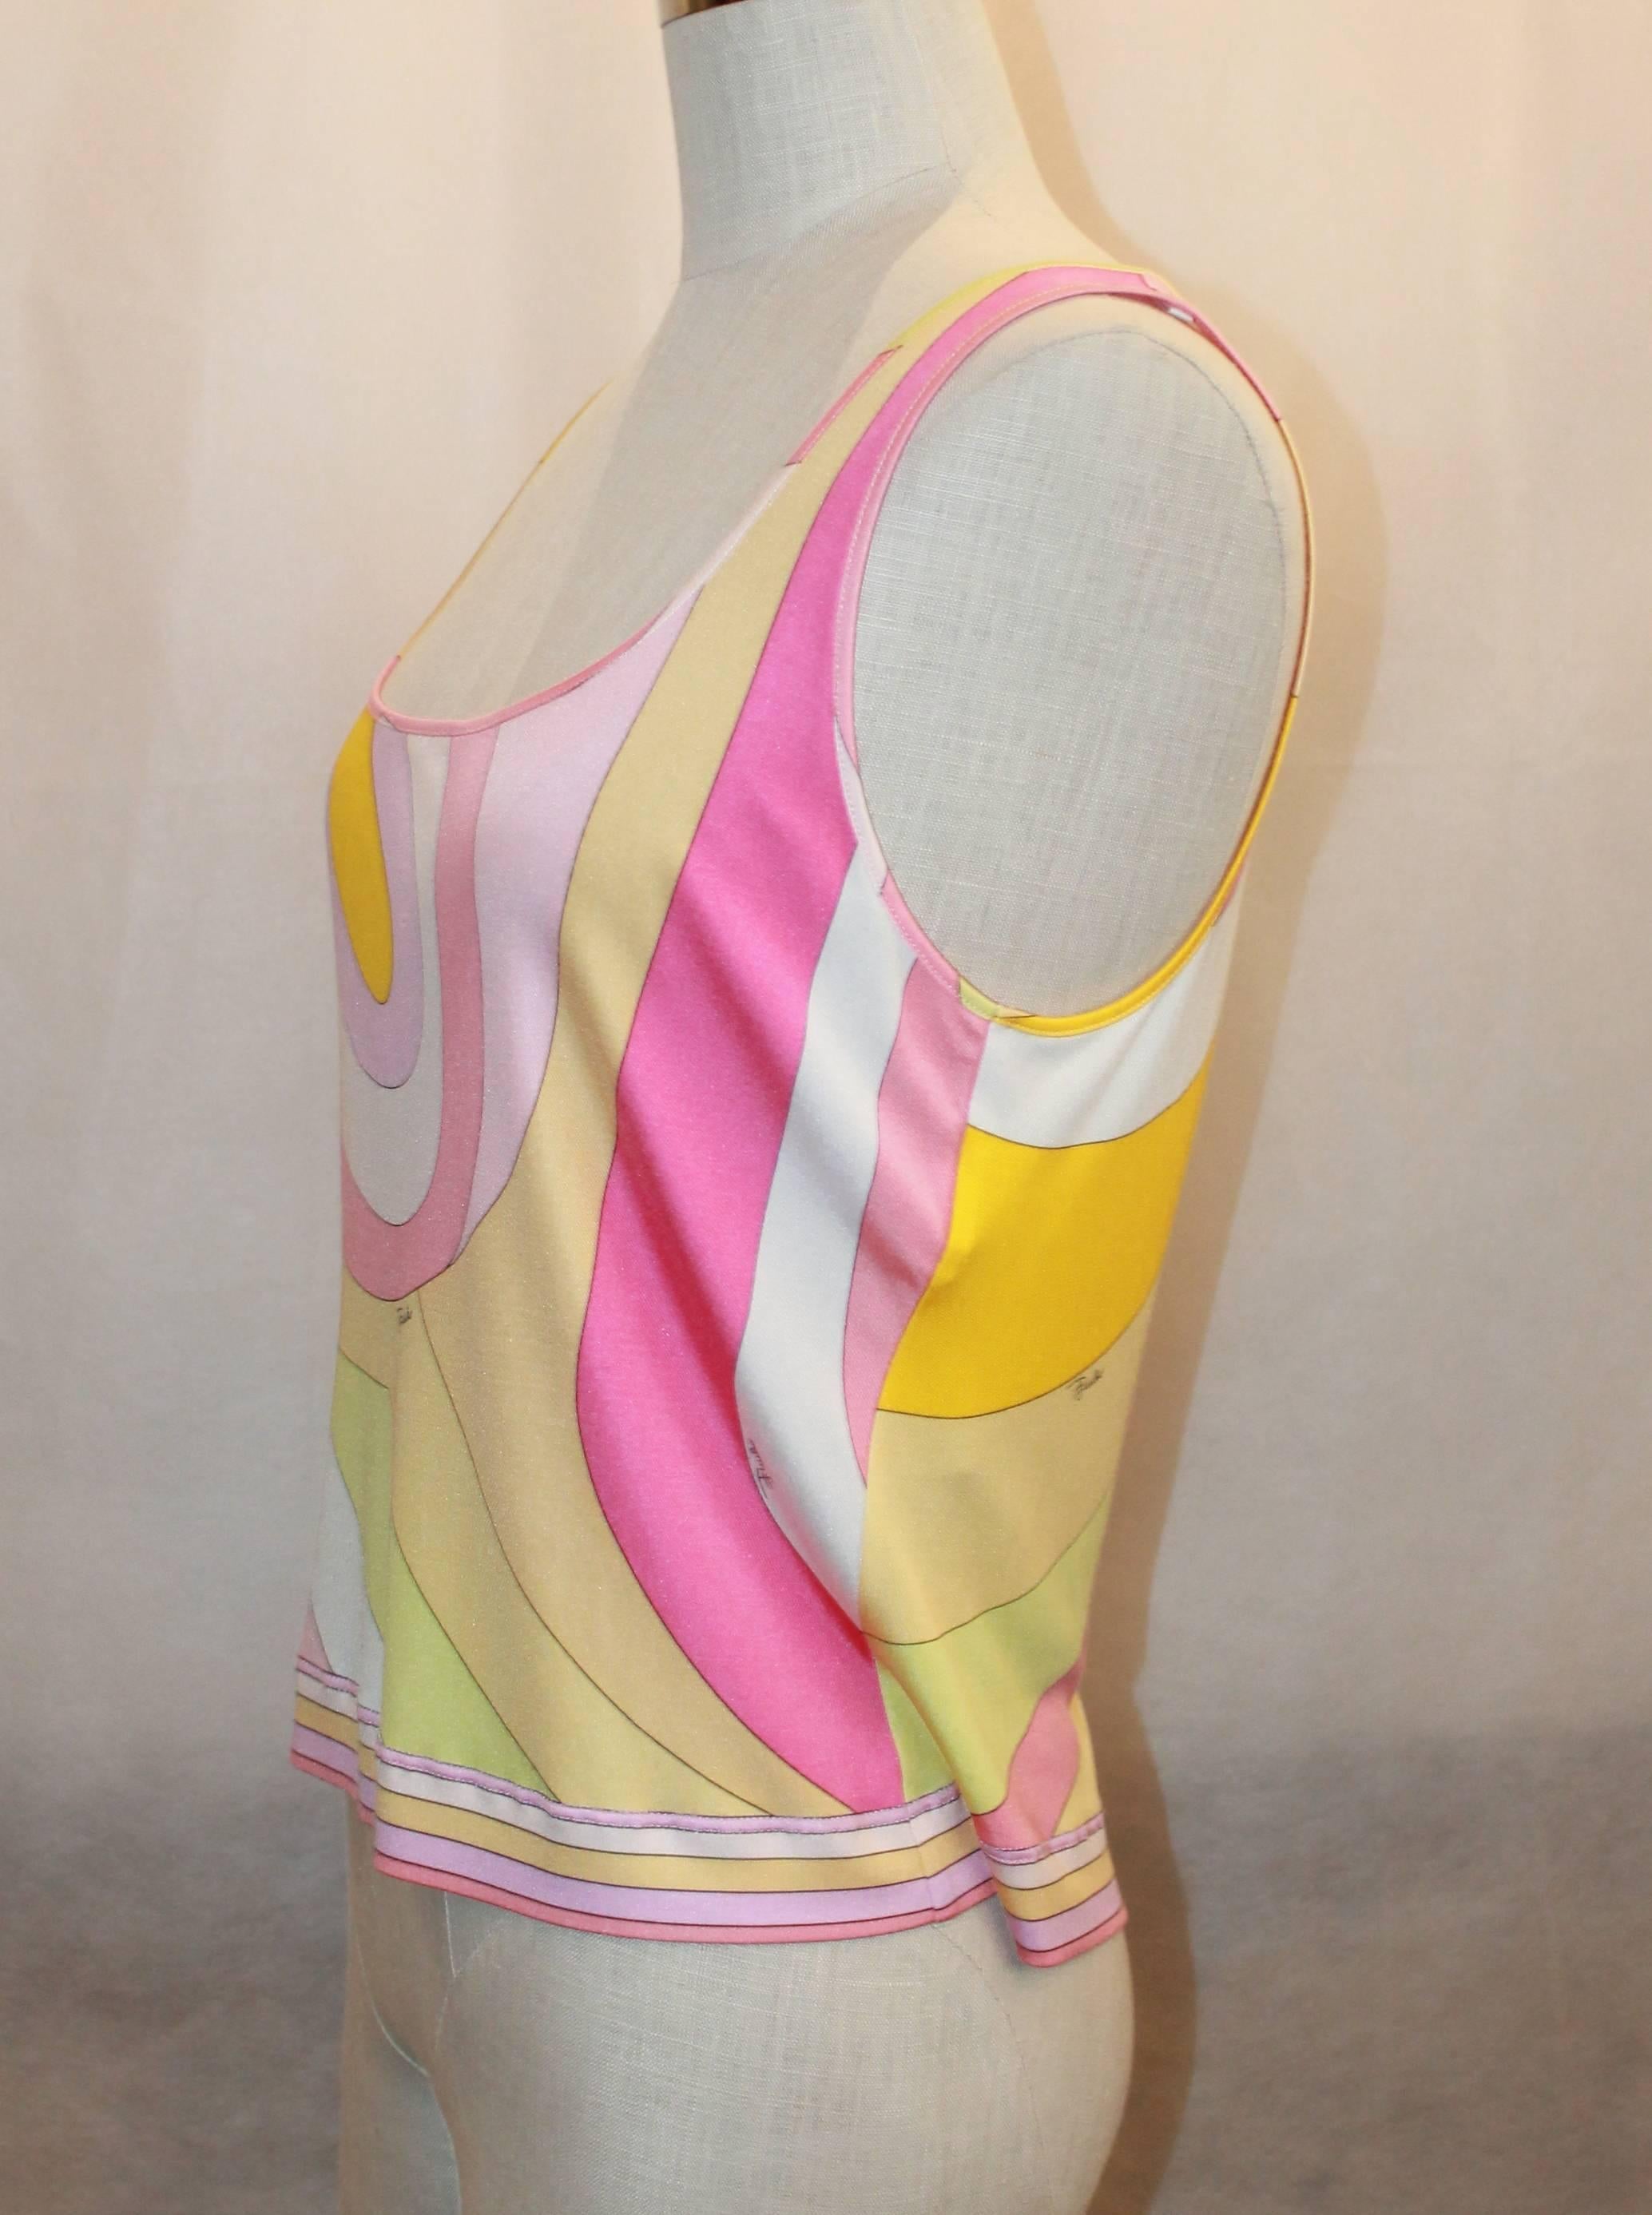 Emilio Pucci Pink & Orange Silk Jersey Sleeveless Striped Tank - 14. This cropped blouse is in good condition with pulls on the fabric. The bright colors are perfect for summer and spring.

Measurements:
Bust- 36